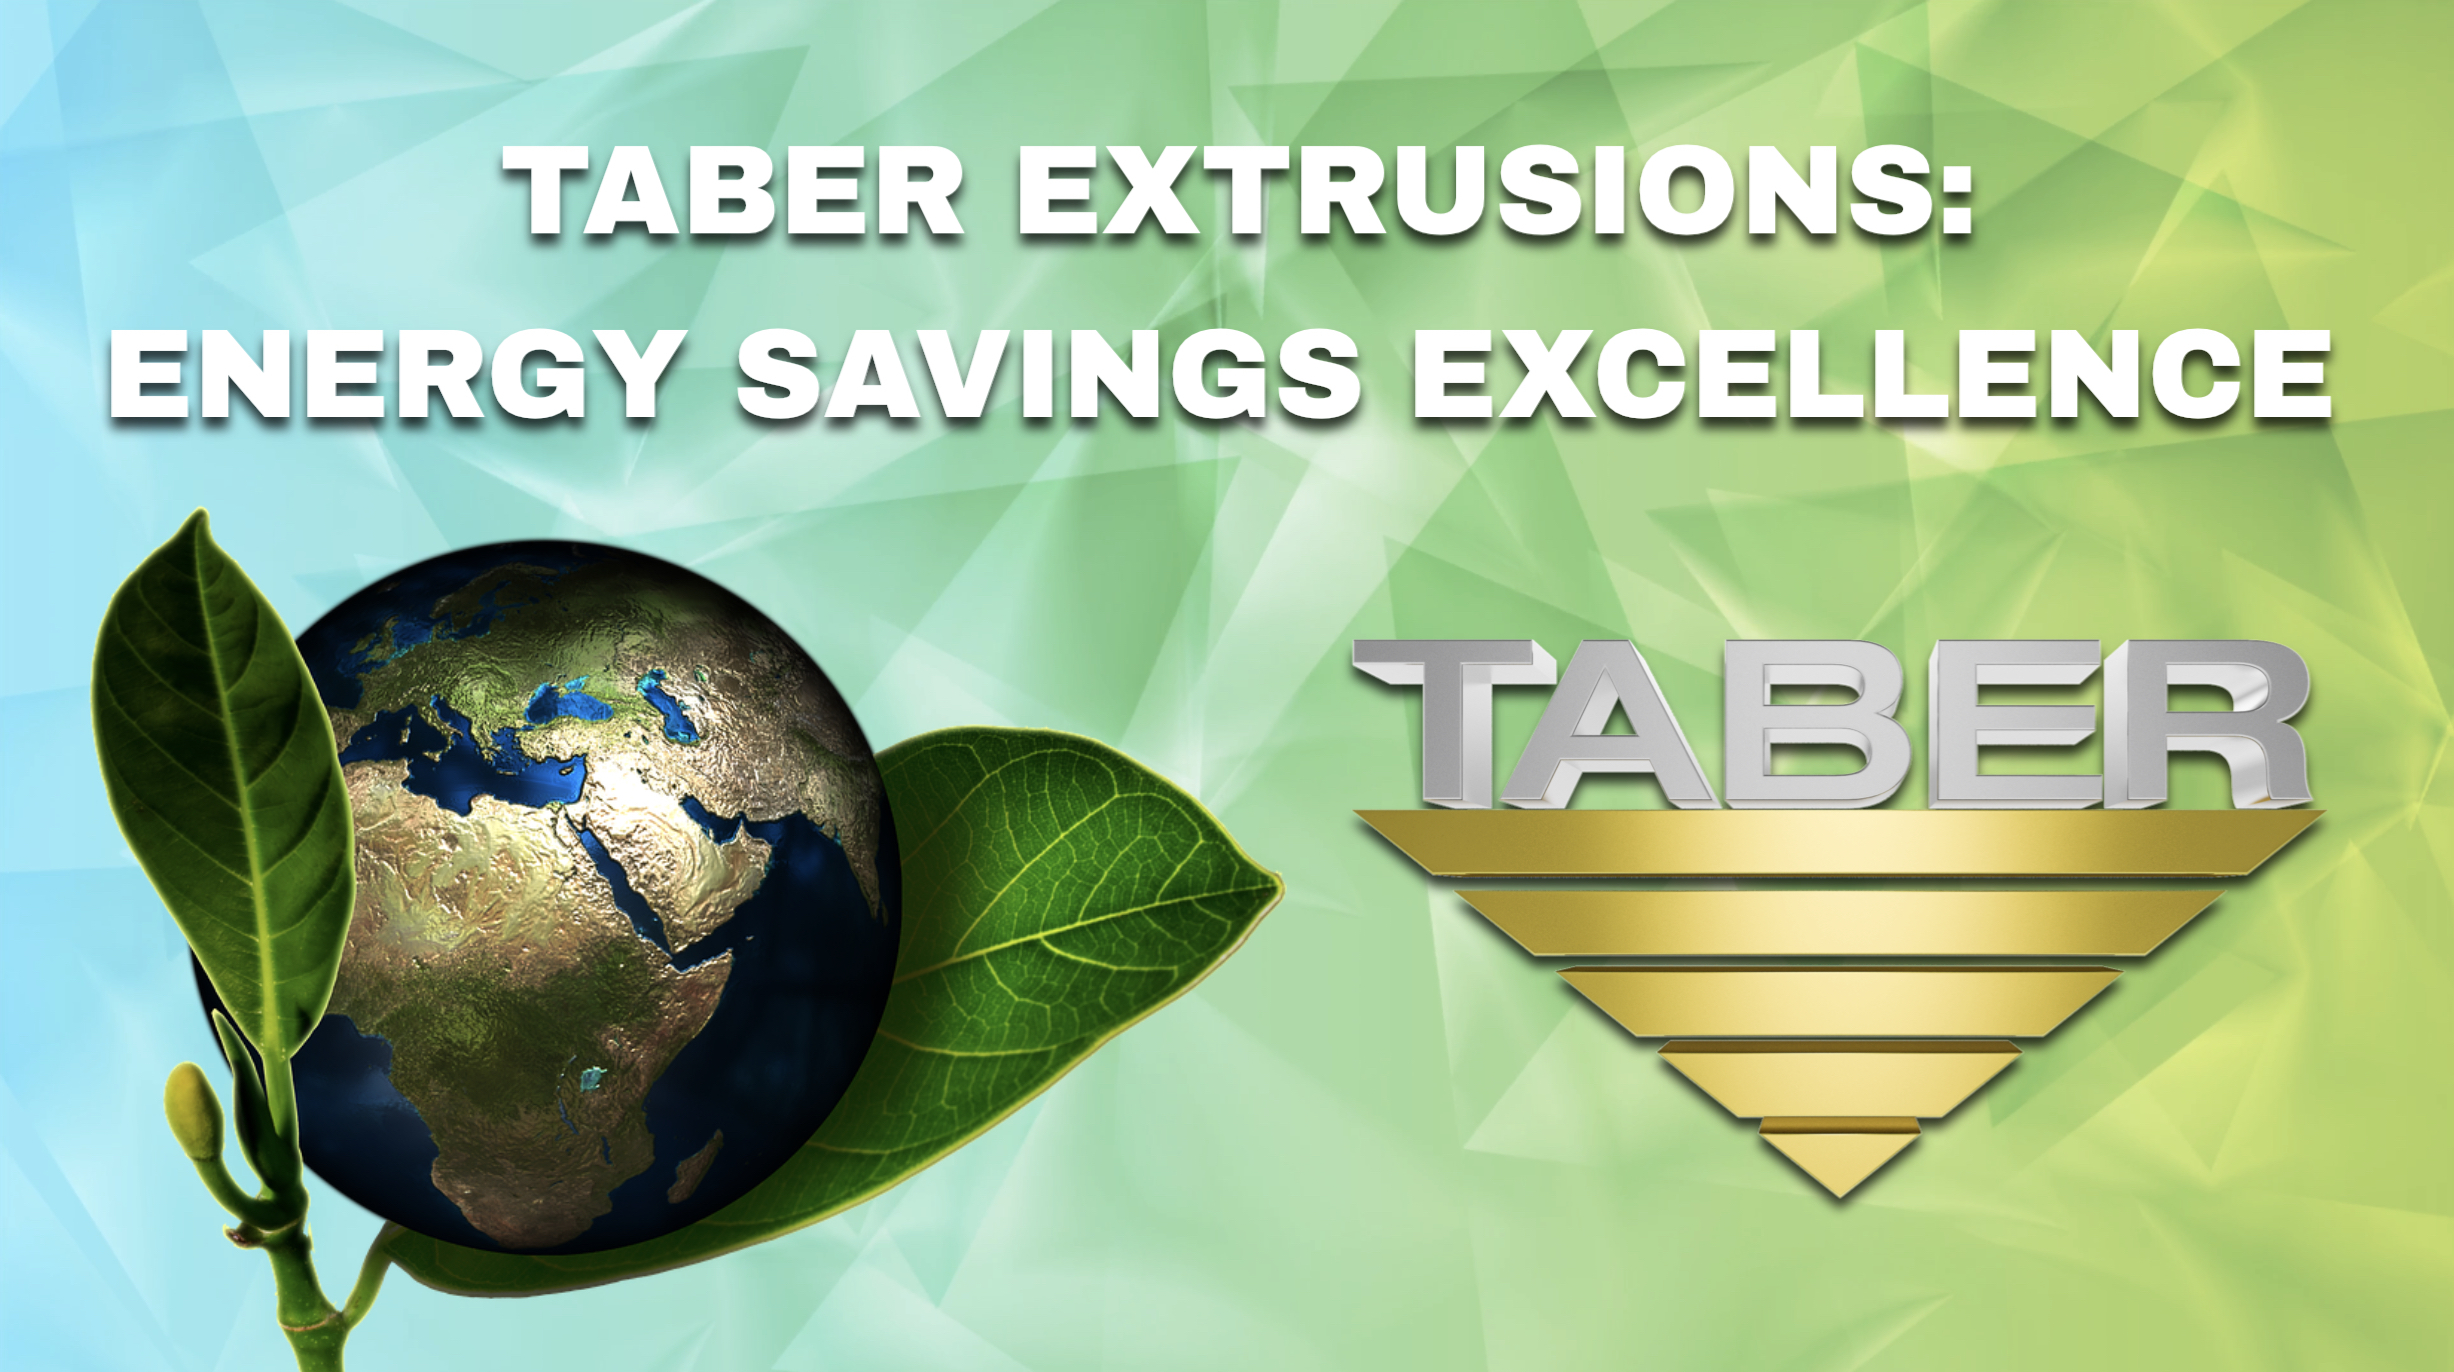 Creatively presented image of planet Earth placed between 2 leaves like a flowering bud alongside Taber’s official gold inverted triangle logo with the words “Taber Extrusions: Energy Savings Excellence.”